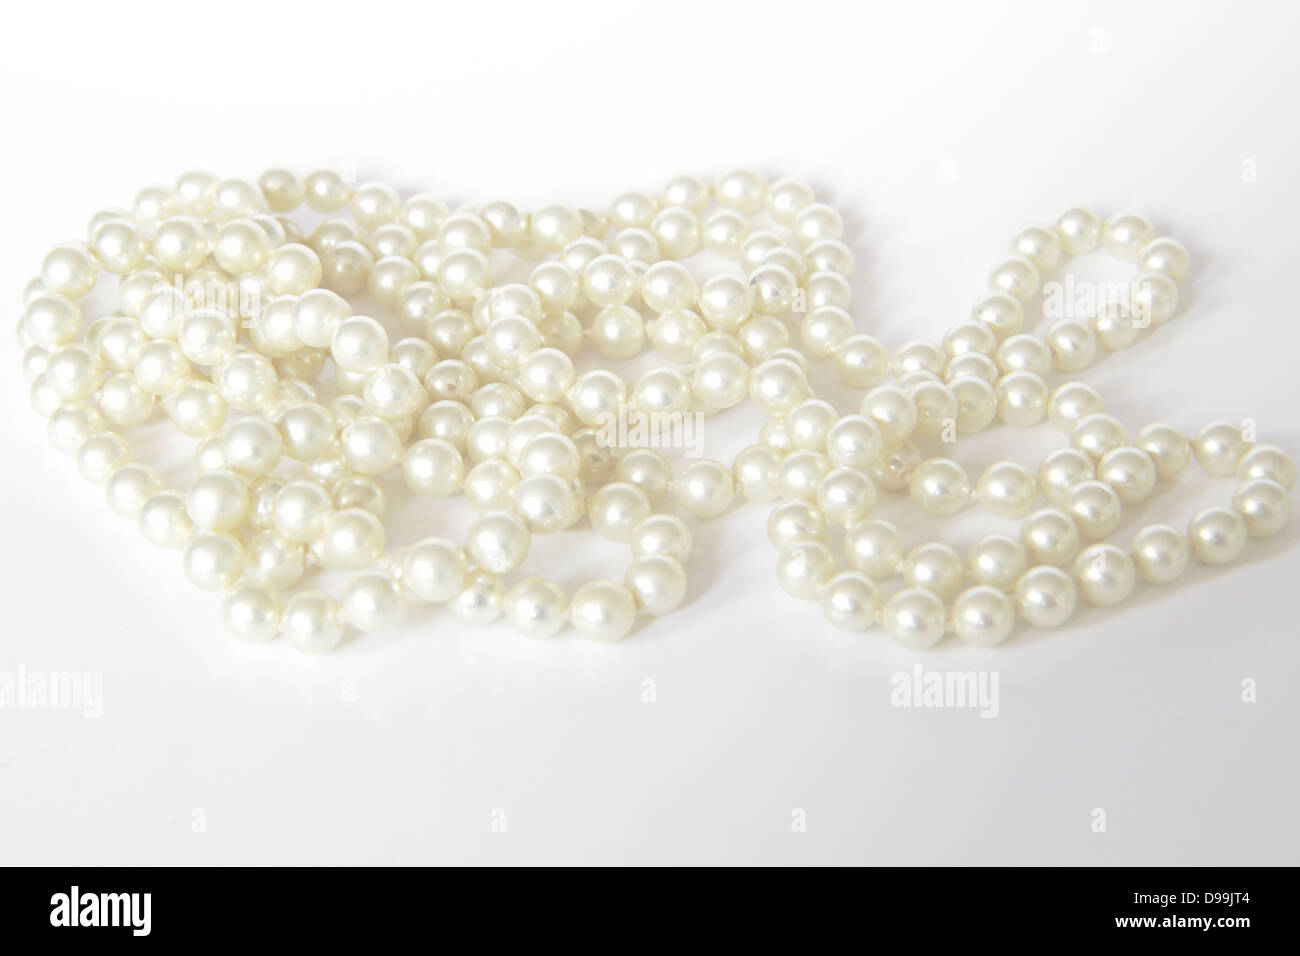 White Pearl Beads On A White Background Stock Photo, Picture and Royalty  Free Image. Image 65558619.